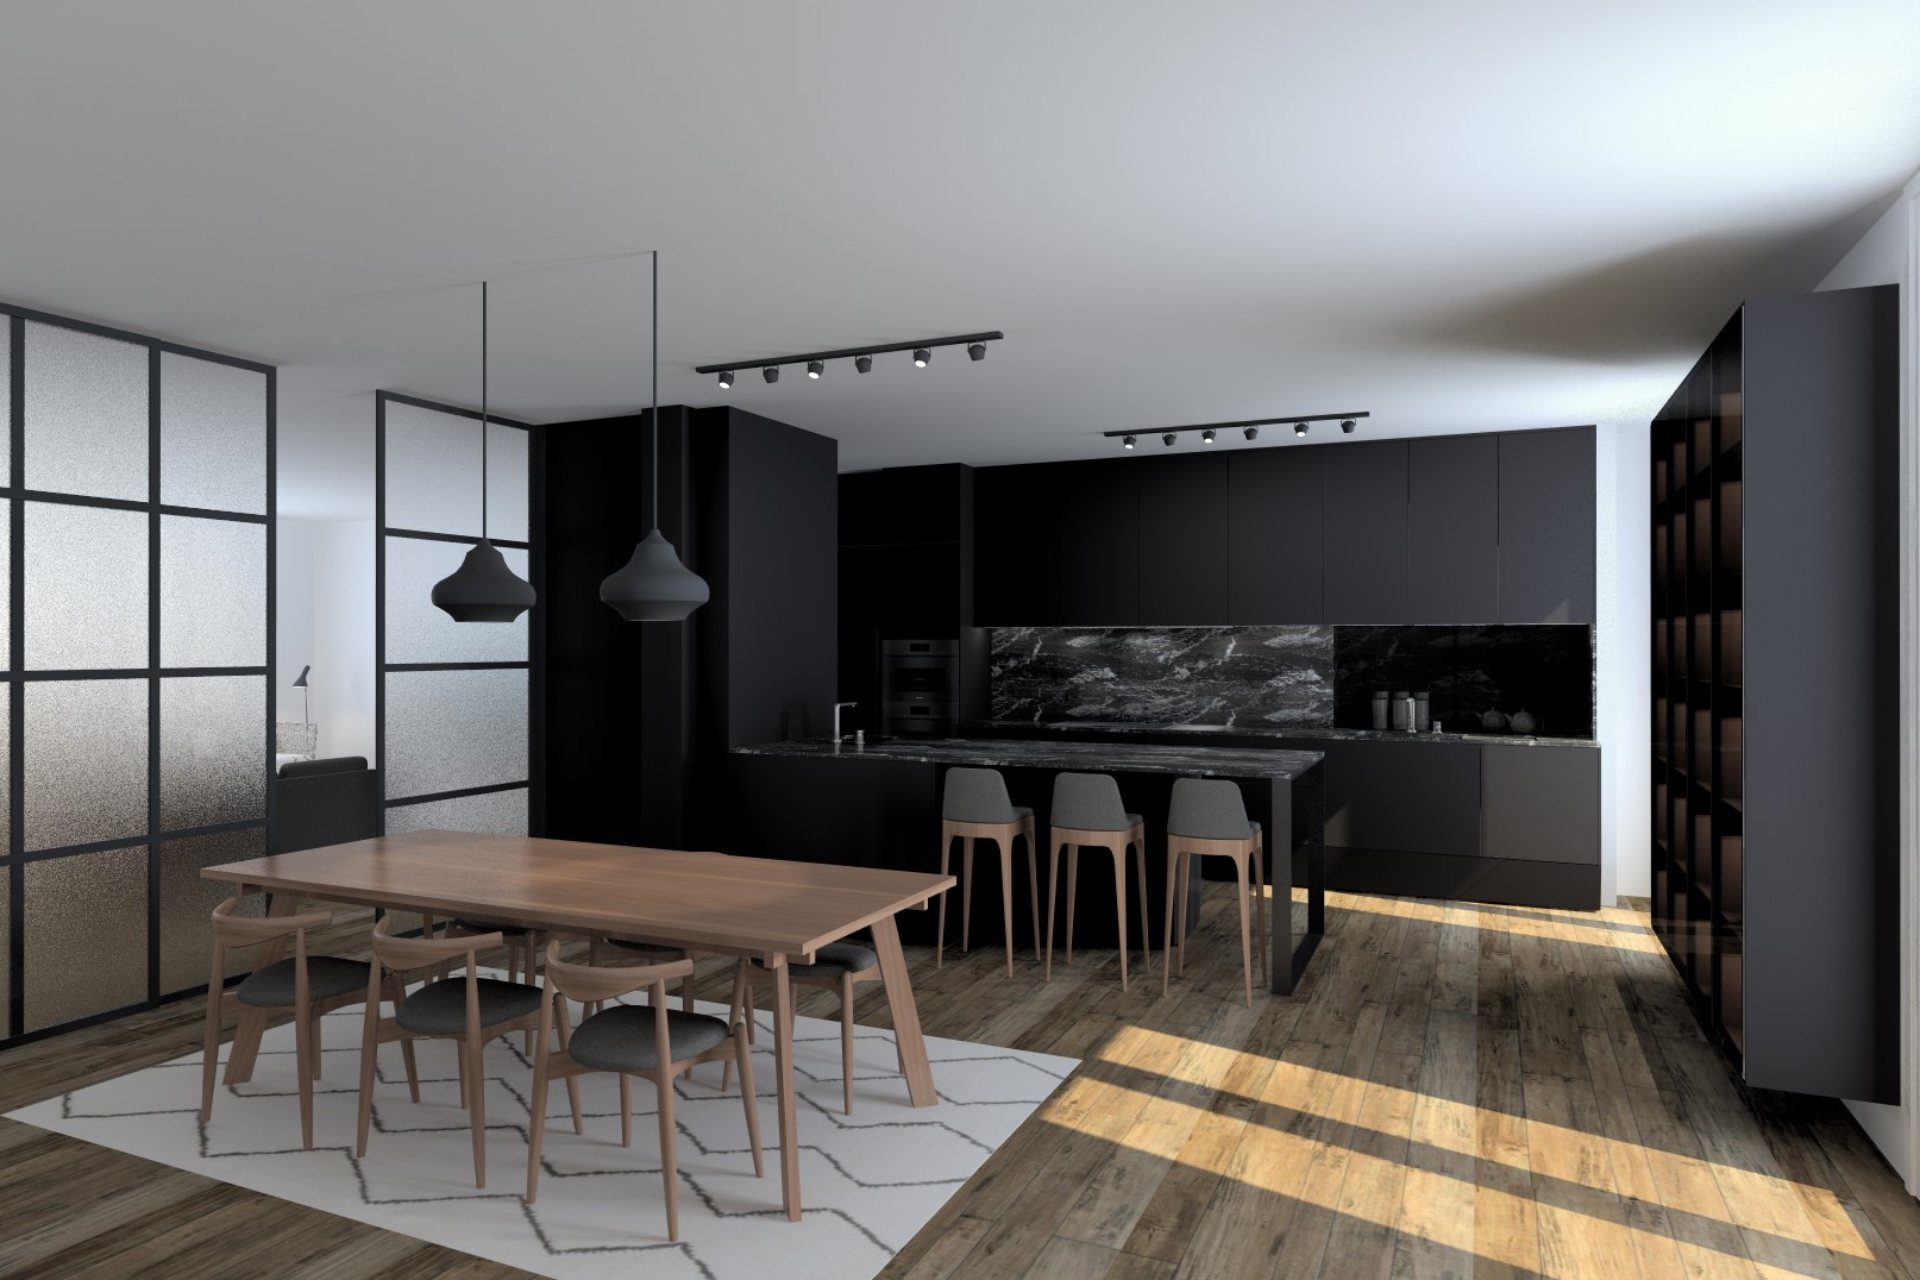 L-shaped kitchen in black and grey tones with a cabinet and wooden dining room furniture